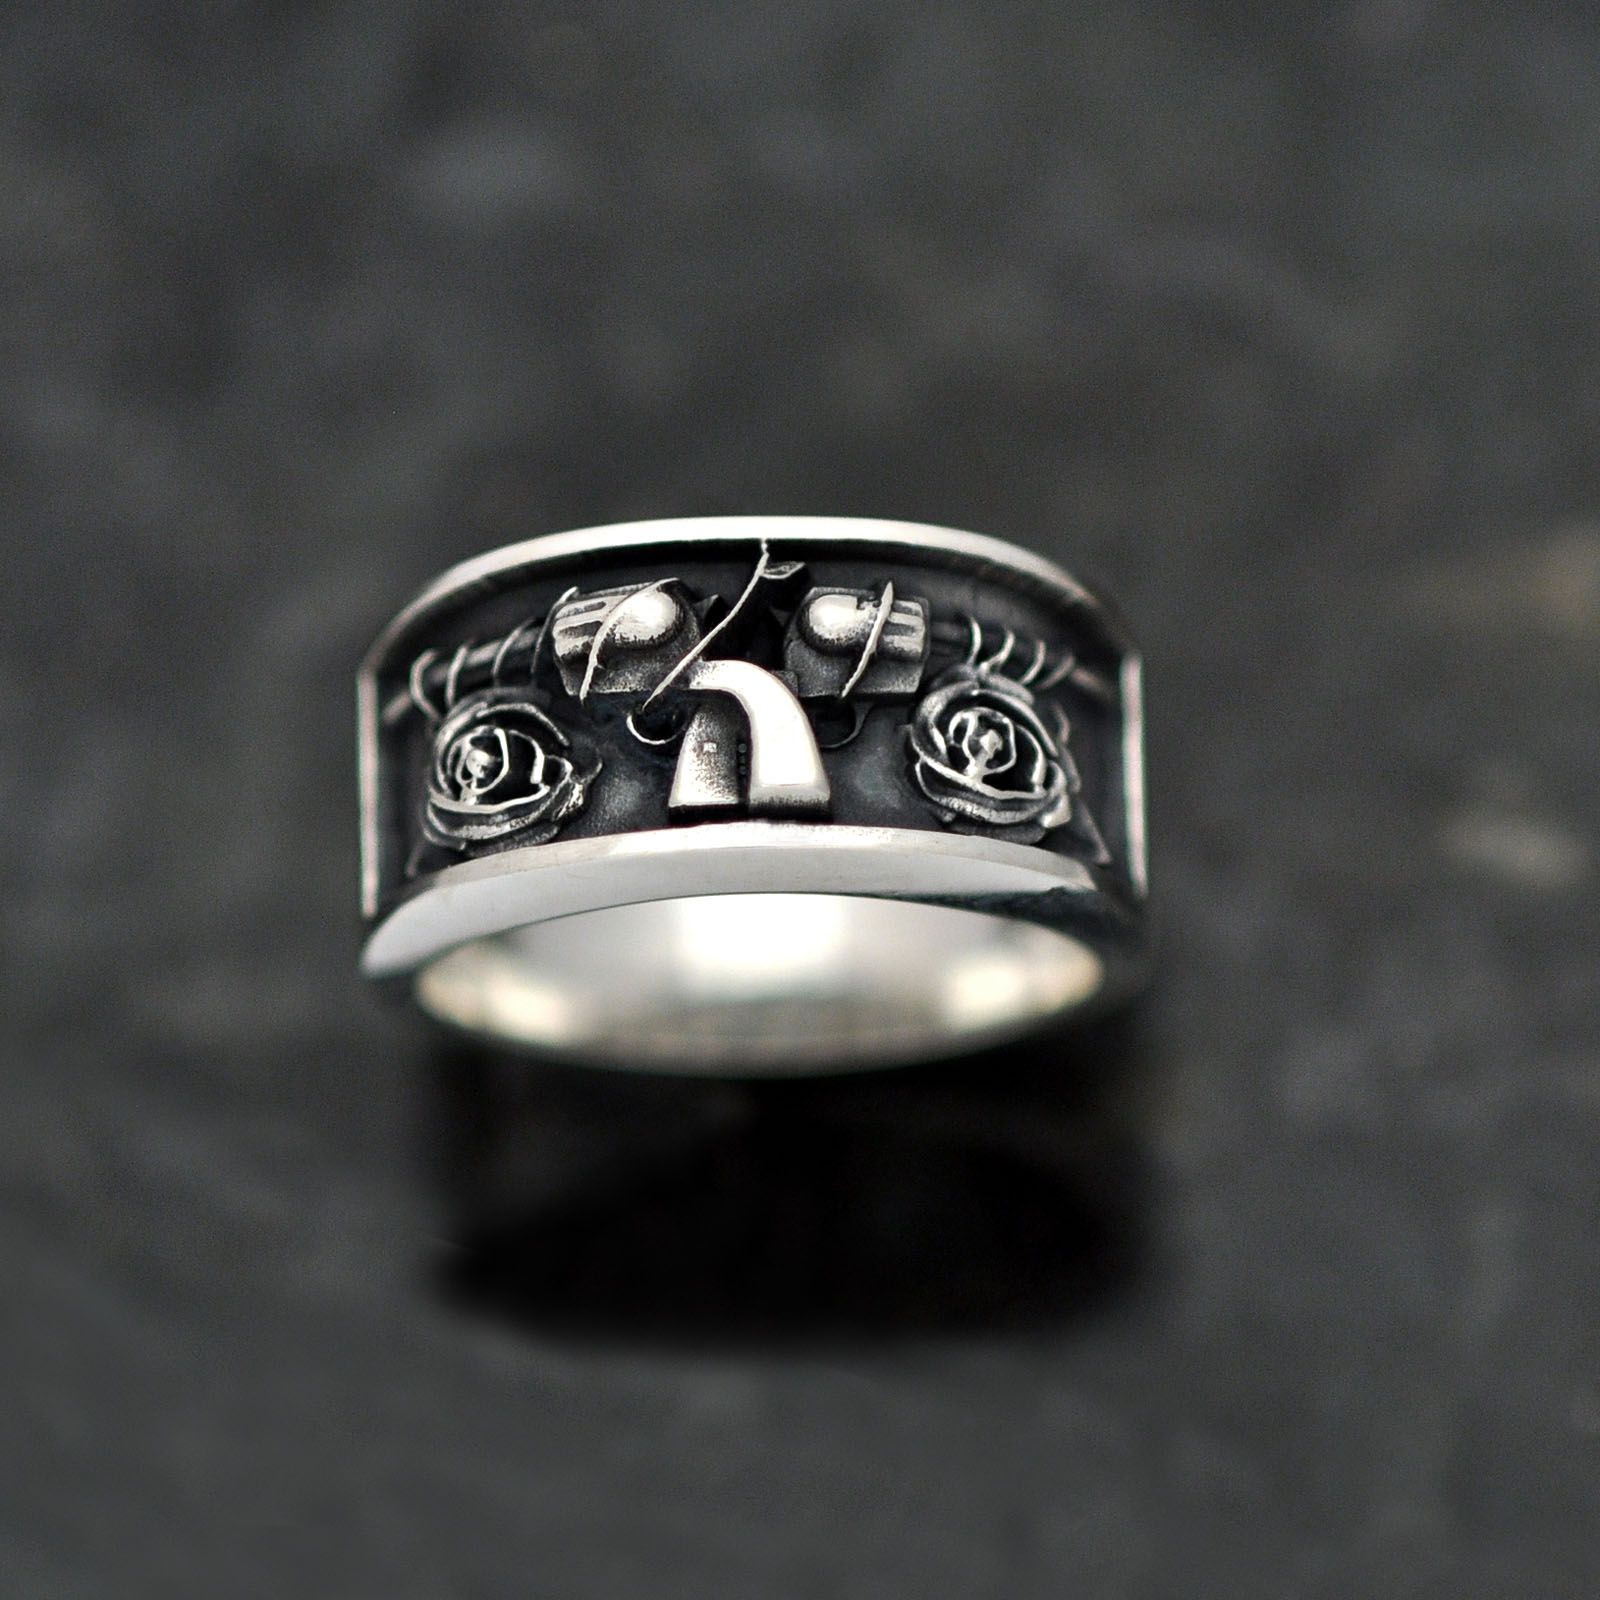 CUSTOM HAND-CARVED GUNS & ROSES RING DESIGN WITH ELK TOOTH